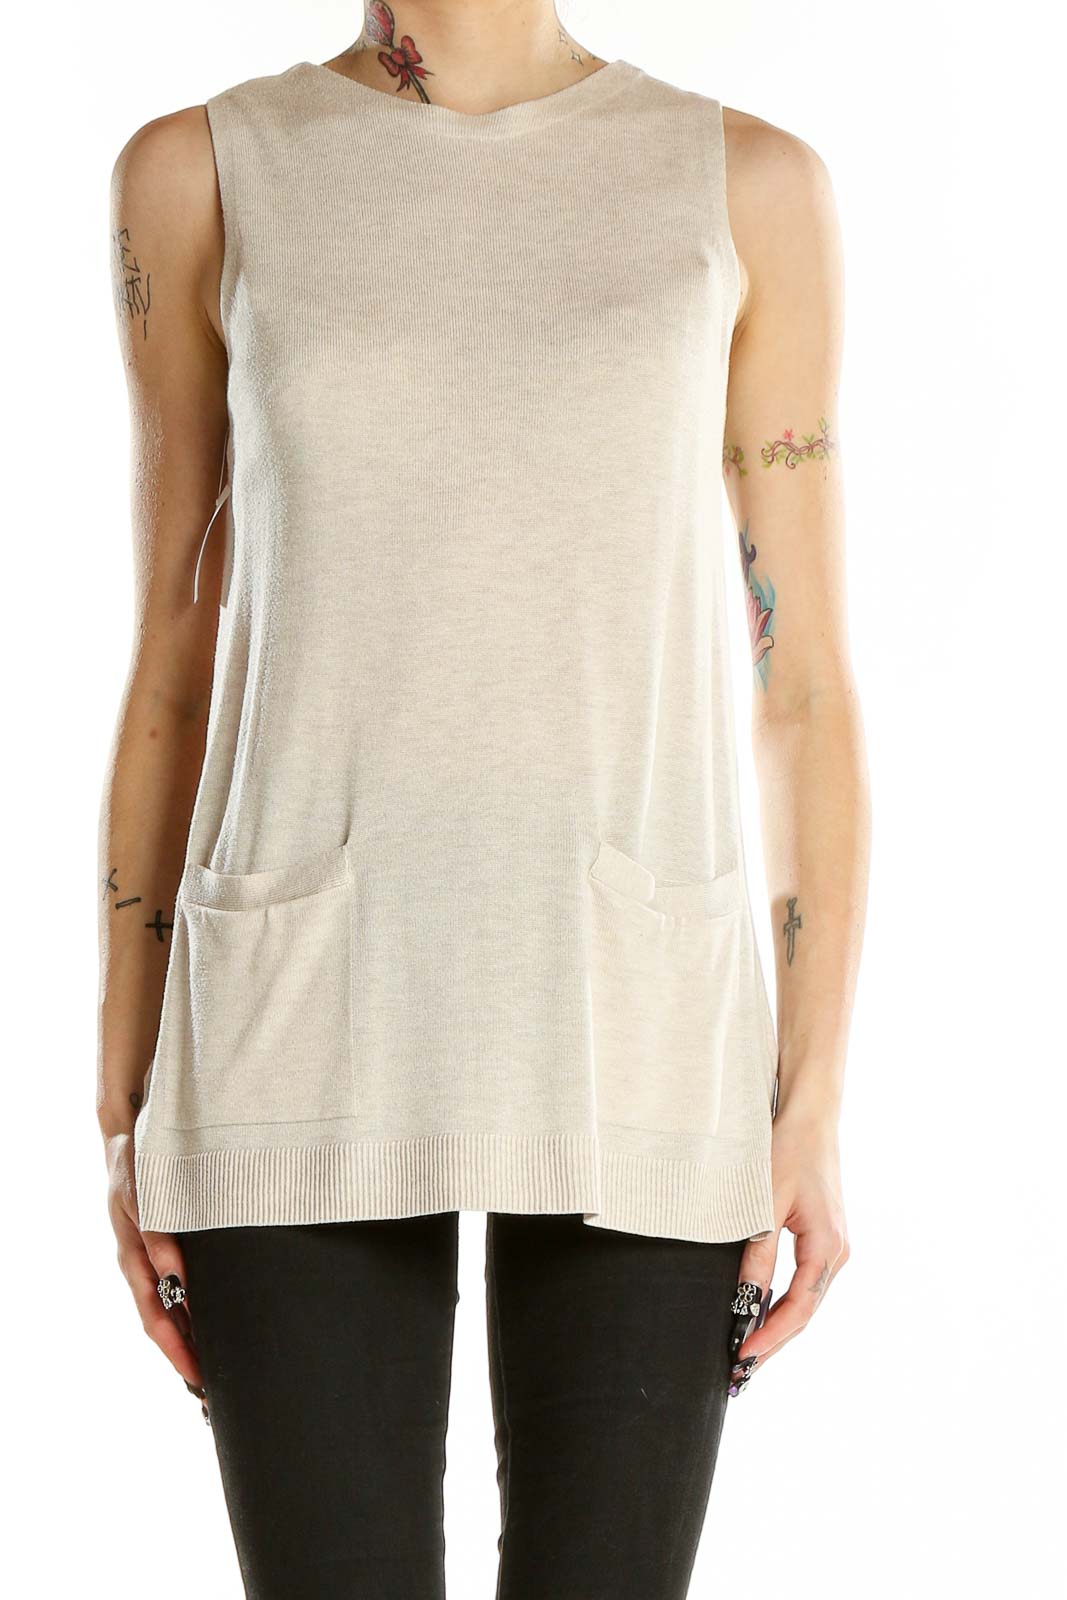 Beige Sleeveless Knit Top Front